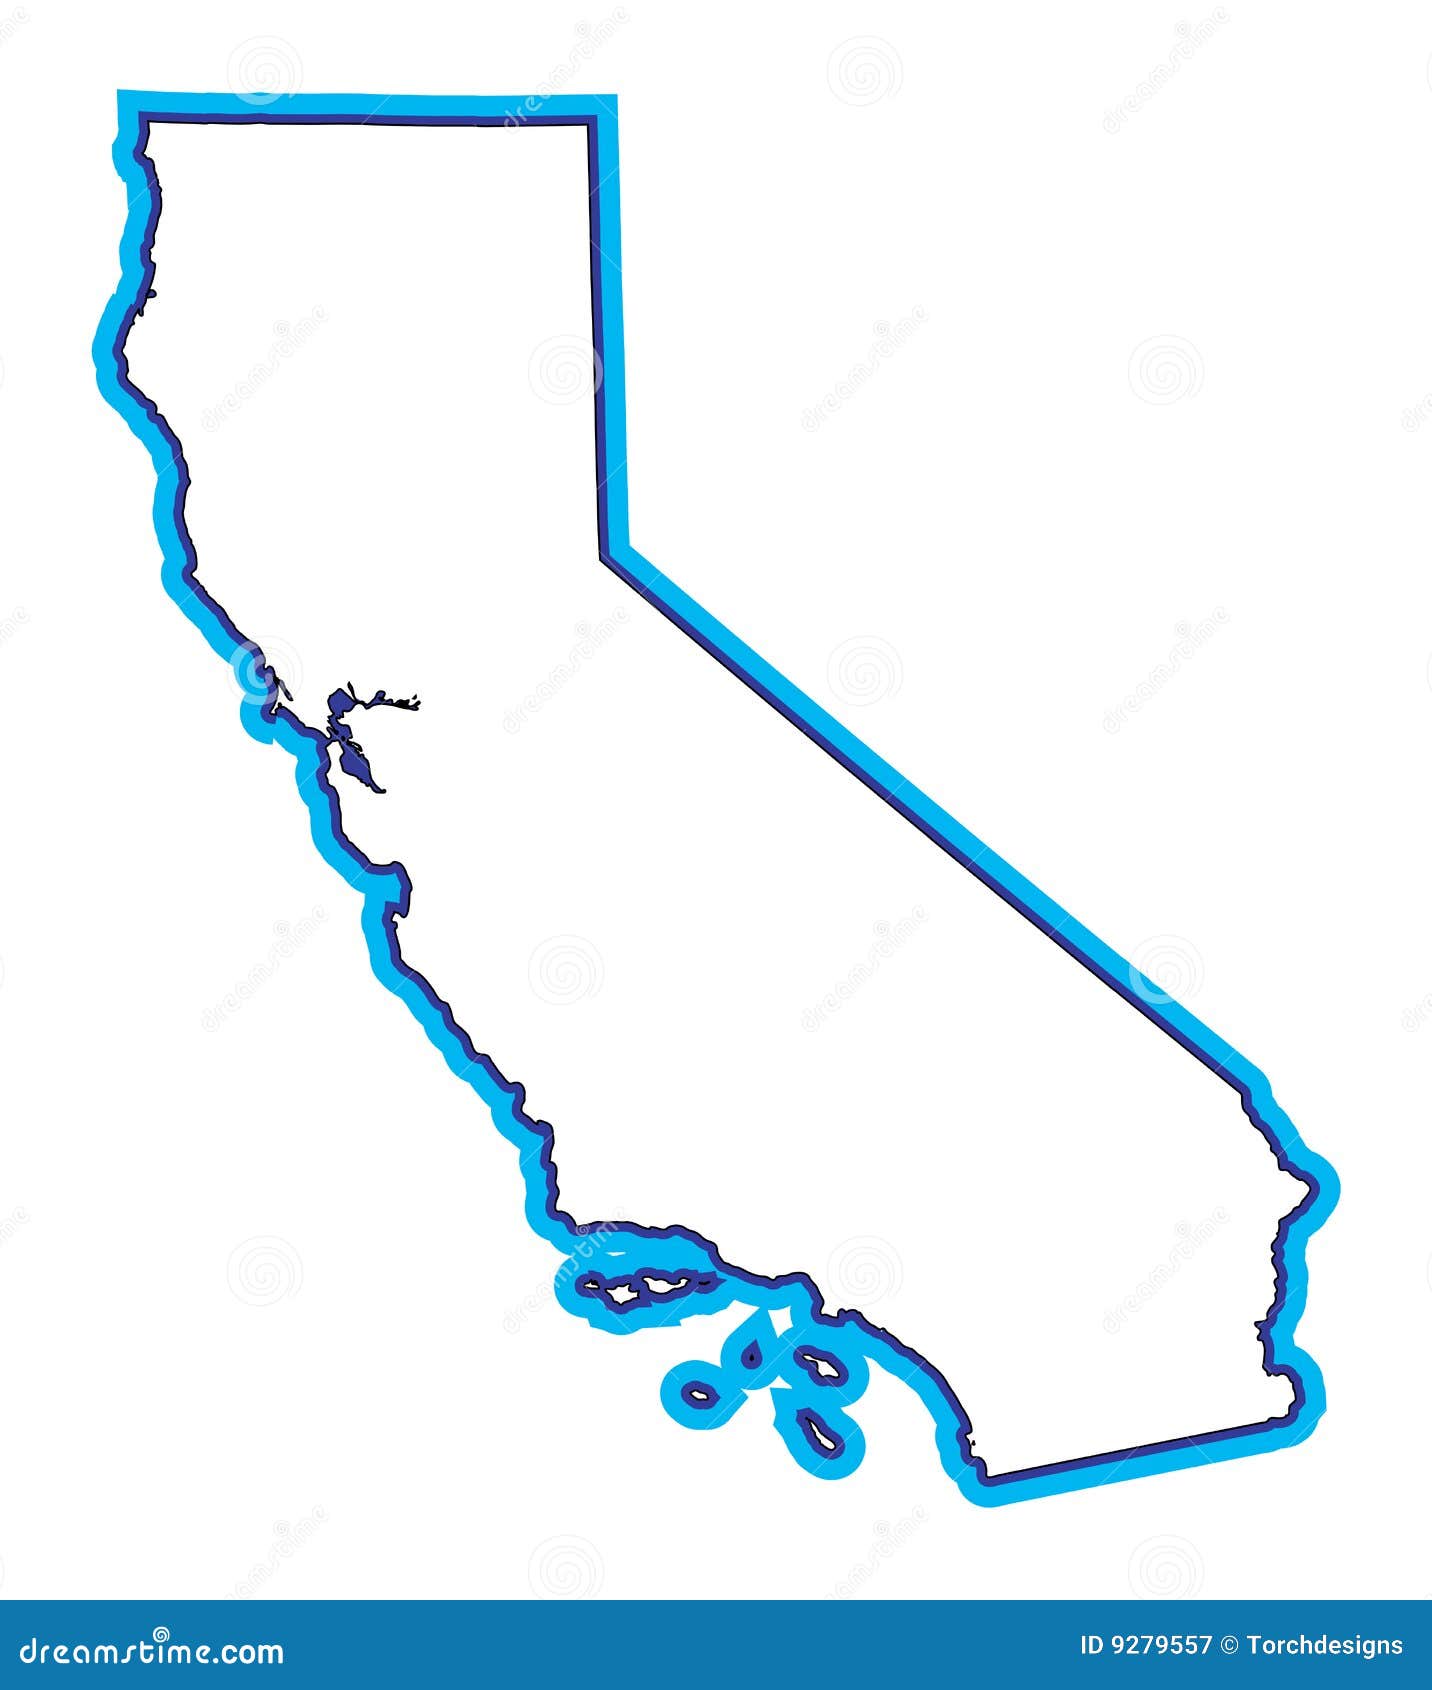 free clipart map of california - photo #16